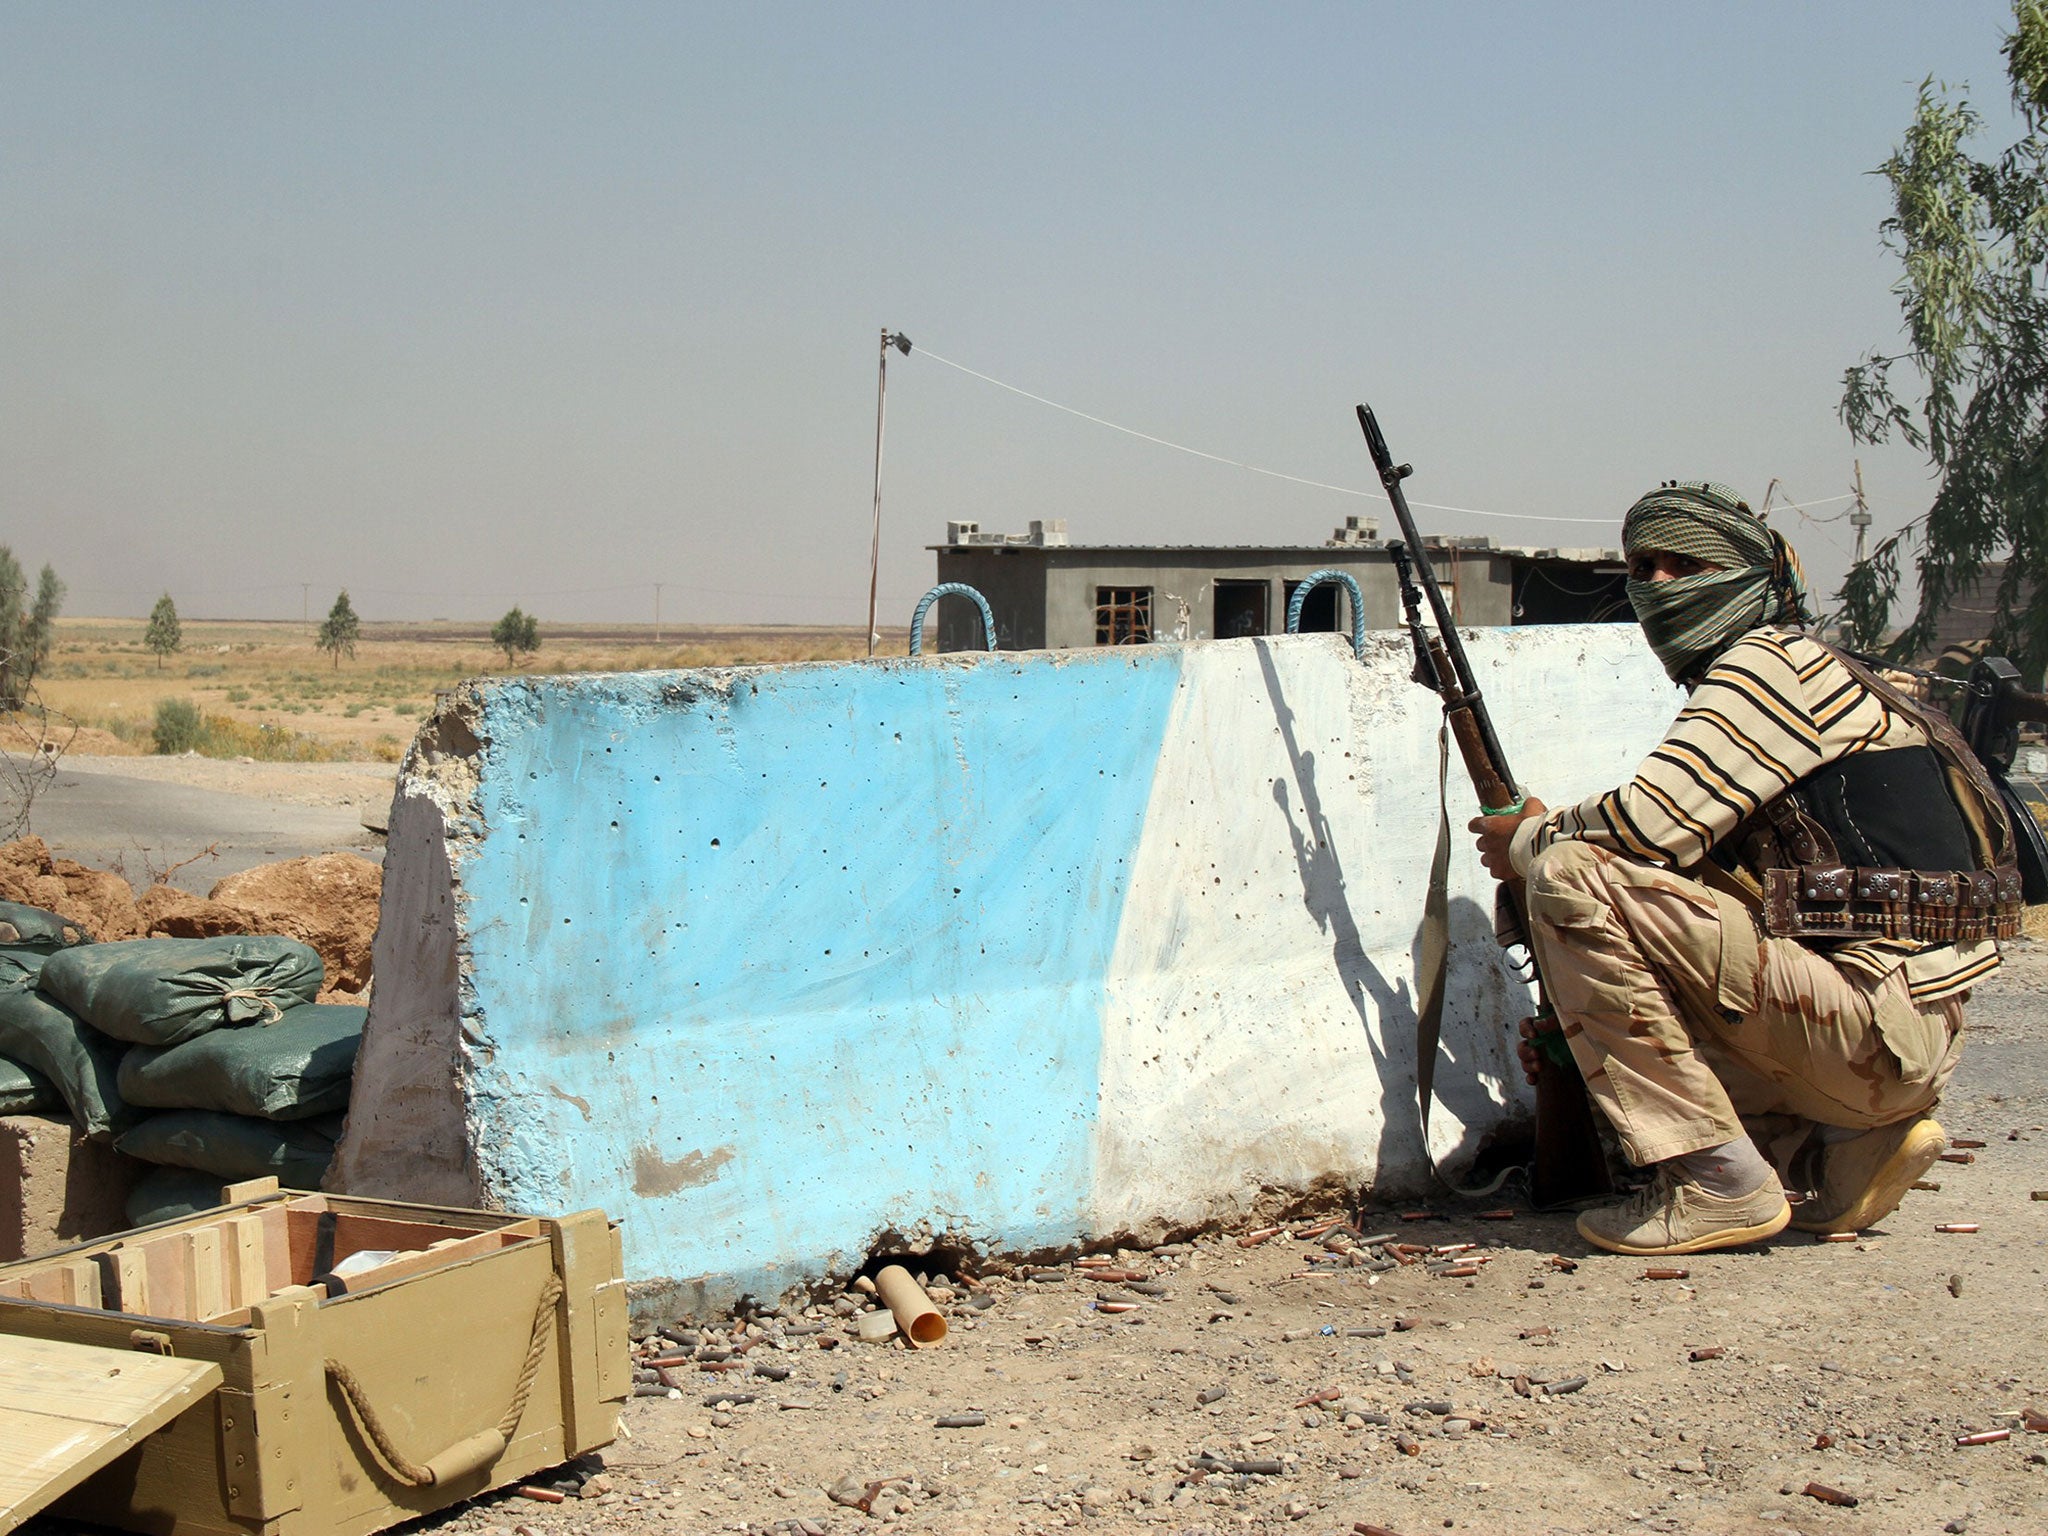 A Iraqi Turkmen Shiite fighter, who volunteered to join the government forces, holds a position on August 4, 2014 in Amerli, some 160 kilometres (100 miles) north of Baghdad. IS fighters launched a blistering offensive on June 9 2014 that saw them capture the Iraqi city of Mosul and move into much of Iraq's Sunni heartland